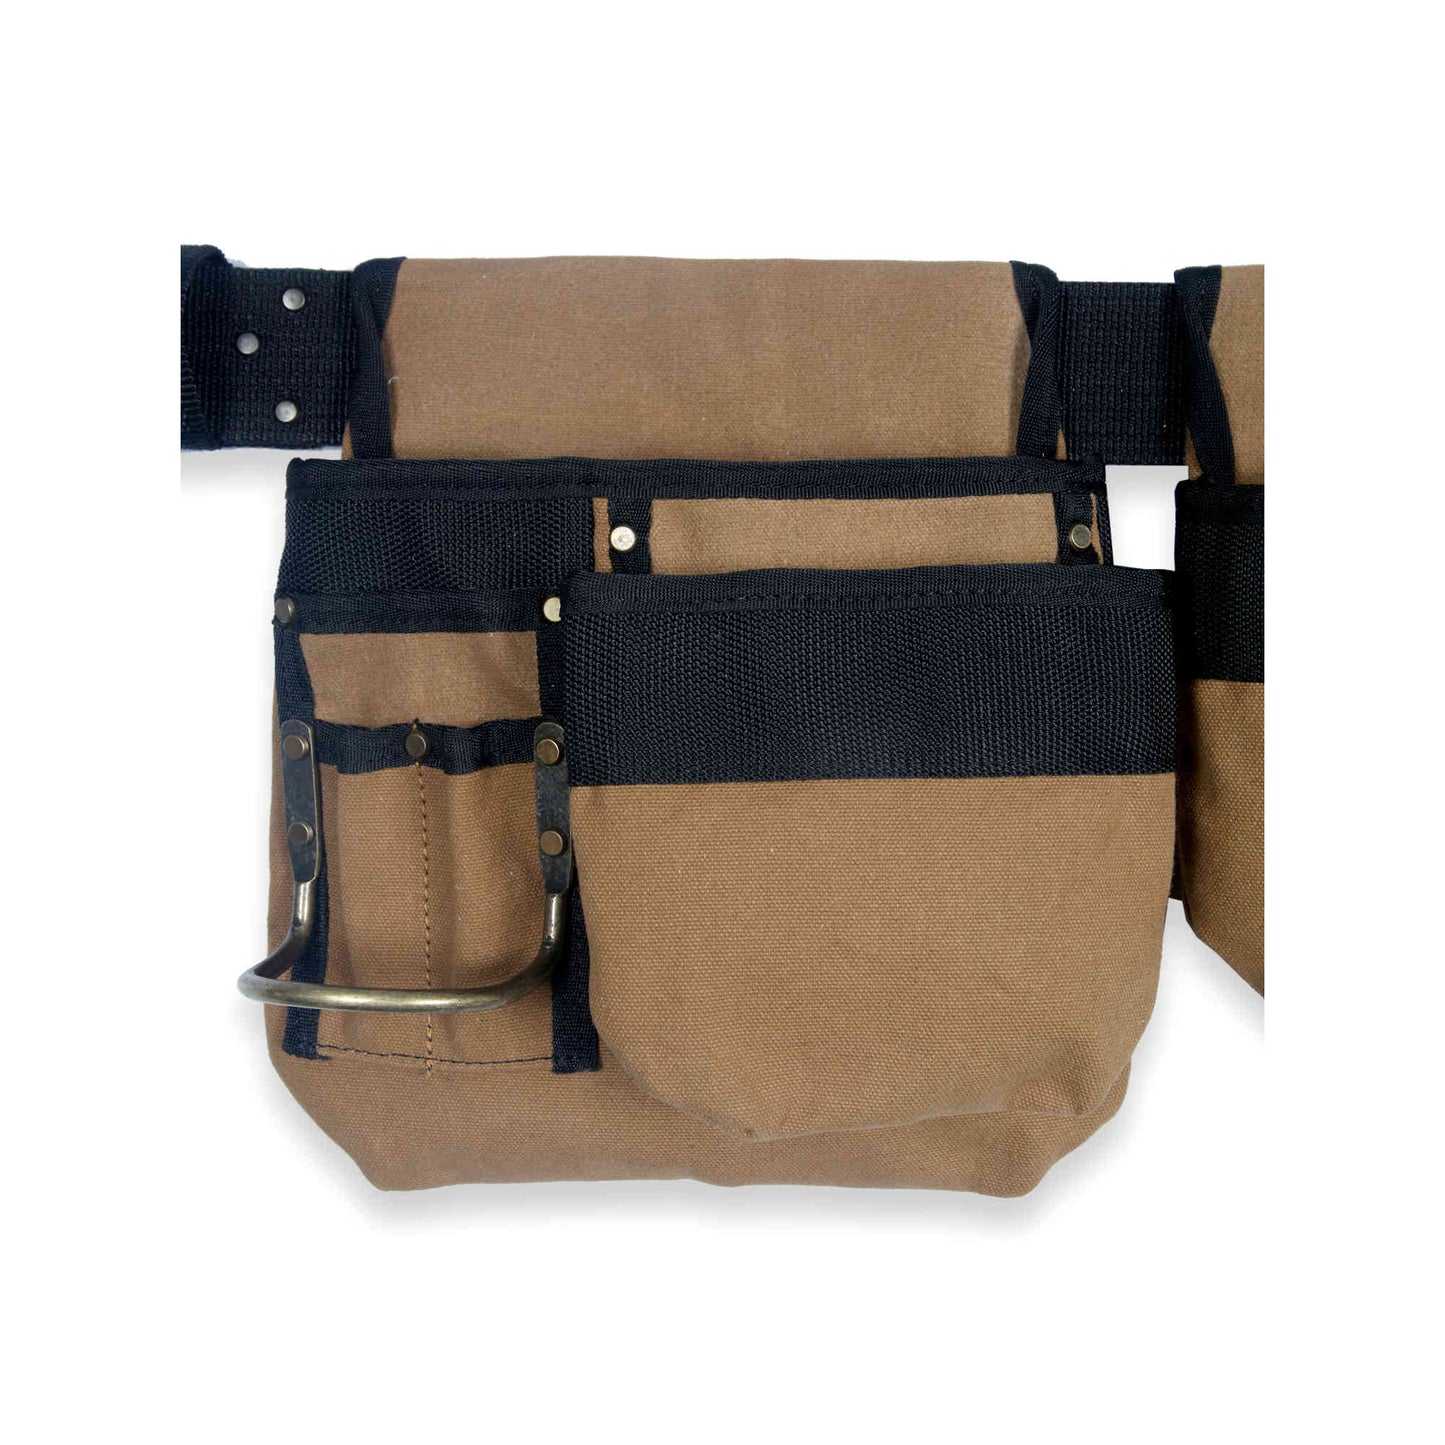 Style n Craft 97425 - 4 Piece 12 Pocket Carpenter's Tool Belt Combo in Brown Waterproof Canvas - Left Side Pouch - Front View